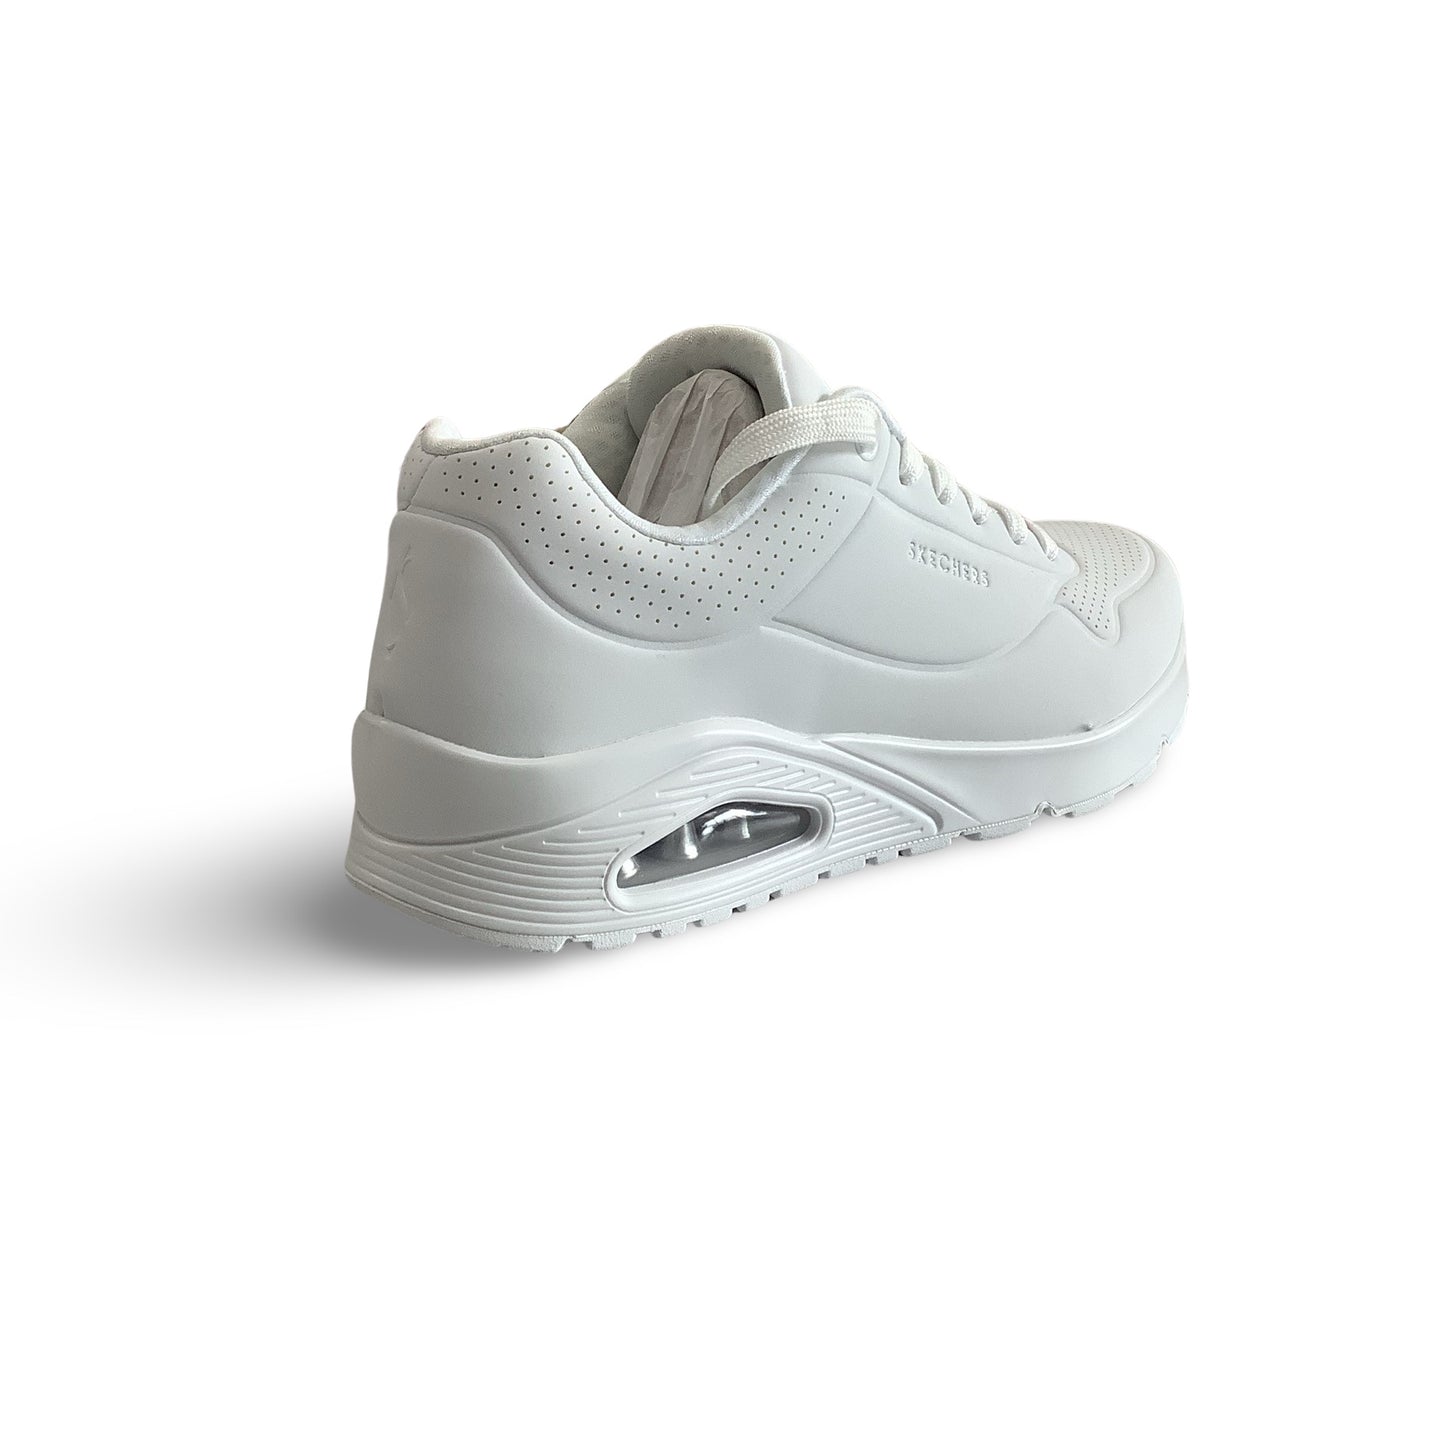 Skechers Stand ON air - UNO